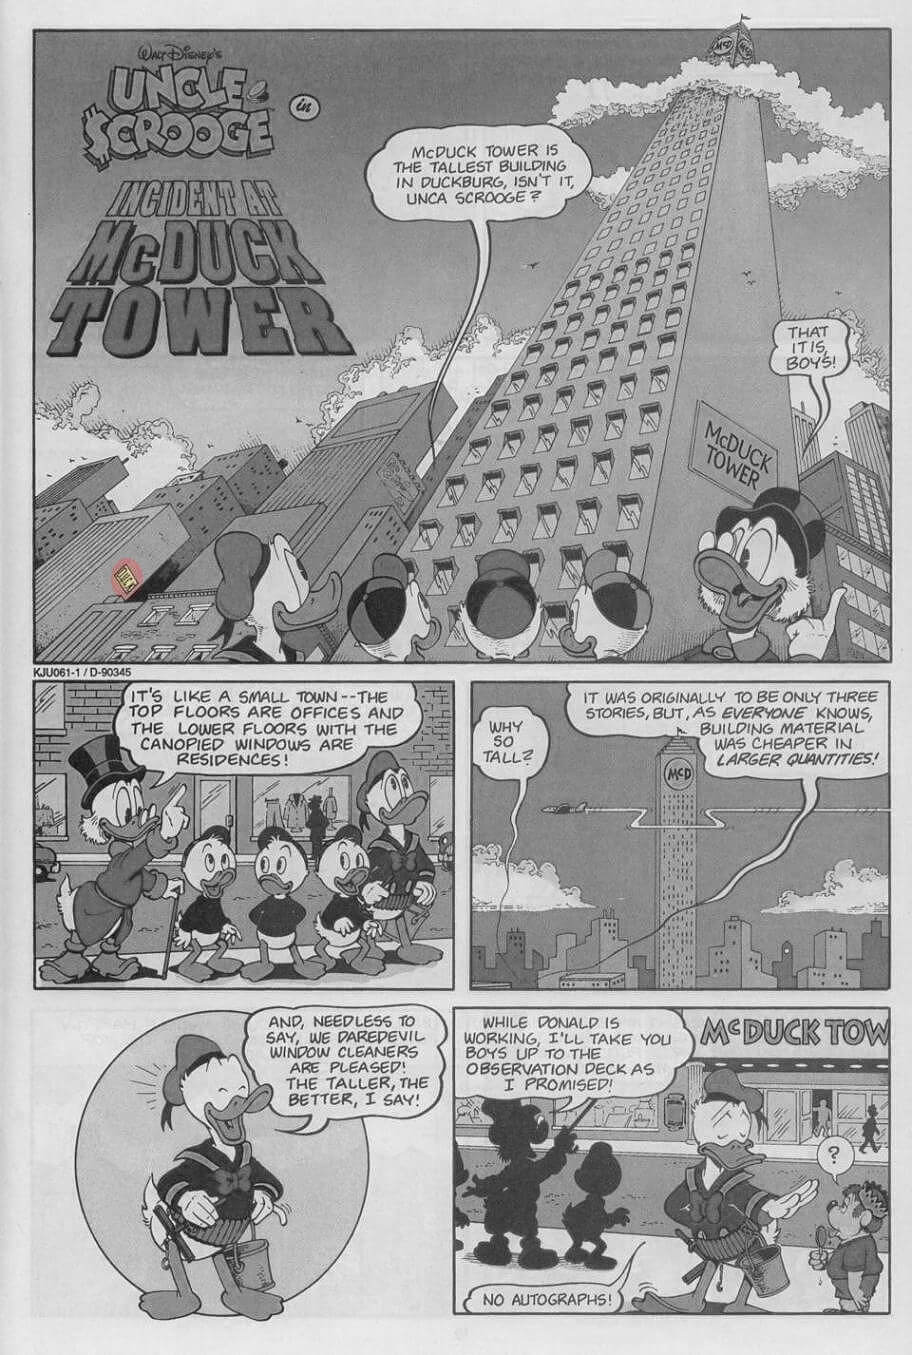 D.U.C.K in Incident At McDuck Tower first page